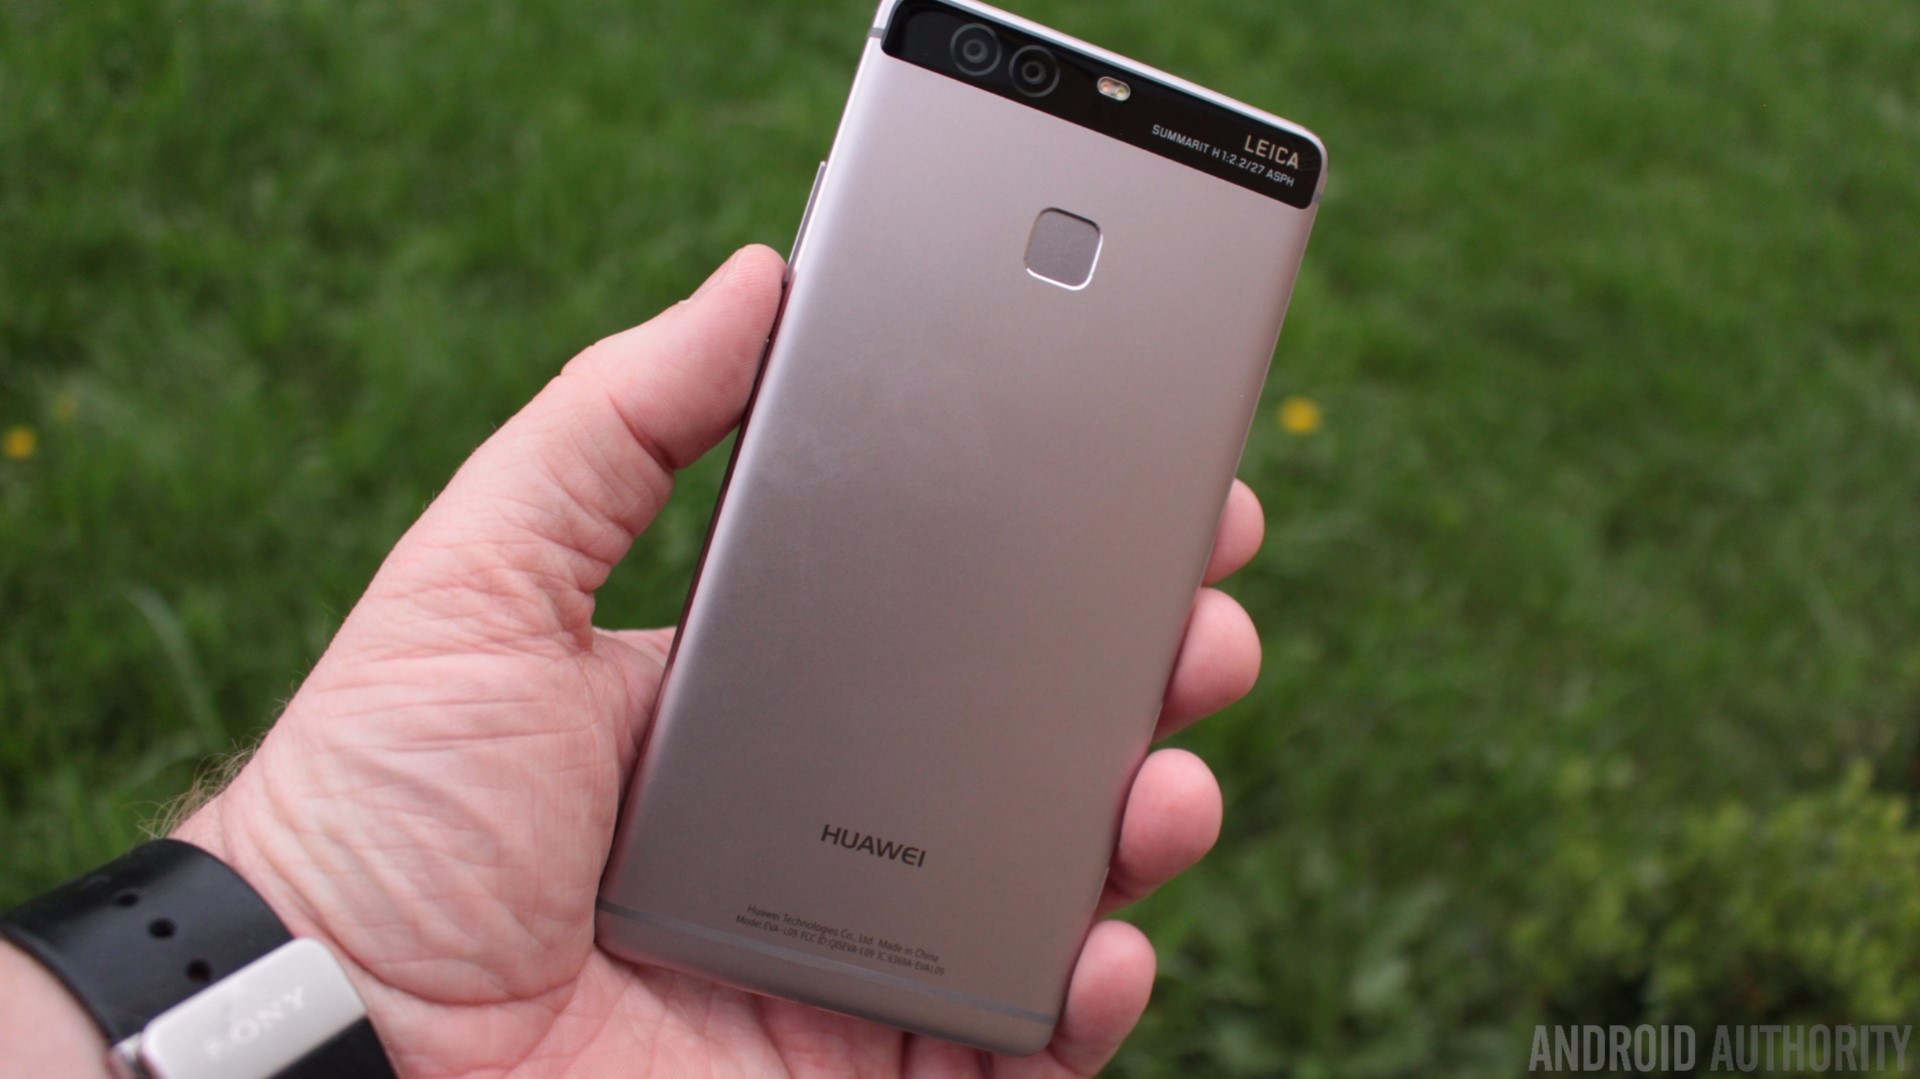 HUAWEI P9 is one of the three phones we tested.